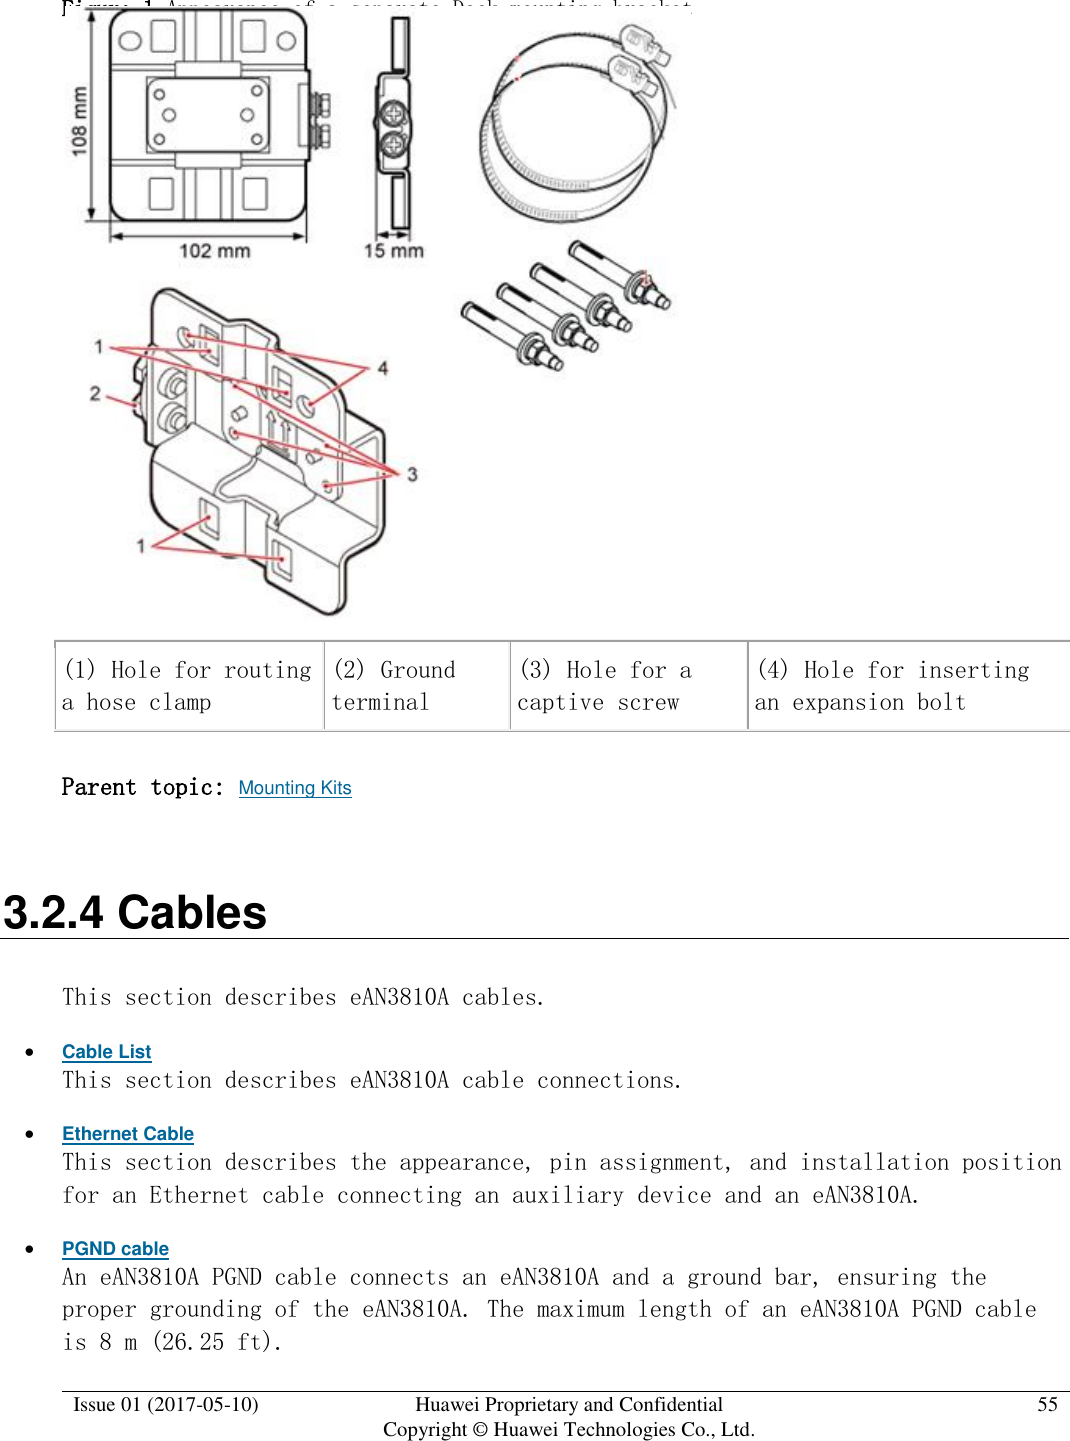  Issue 01 (2017-05-10) Huawei Proprietary and Confidential      Copyright © Huawei Technologies Co., Ltd. 55  Figure 1 Appearance of a separate Dock mounting bracket   (1) Hole for routing a hose clamp (2) Ground terminal (3) Hole for a captive screw (4) Hole for inserting an expansion bolt Parent topic: Mounting Kits 3.2.4 Cables This section describes eAN3810A cables.  Cable List This section describes eAN3810A cable connections.  Ethernet Cable This section describes the appearance, pin assignment, and installation position for an Ethernet cable connecting an auxiliary device and an eAN3810A.  PGND cable An eAN3810A PGND cable connects an eAN3810A and a ground bar, ensuring the proper grounding of the eAN3810A. The maximum length of an eAN3810A PGND cable is 8 m (26.25 ft).  